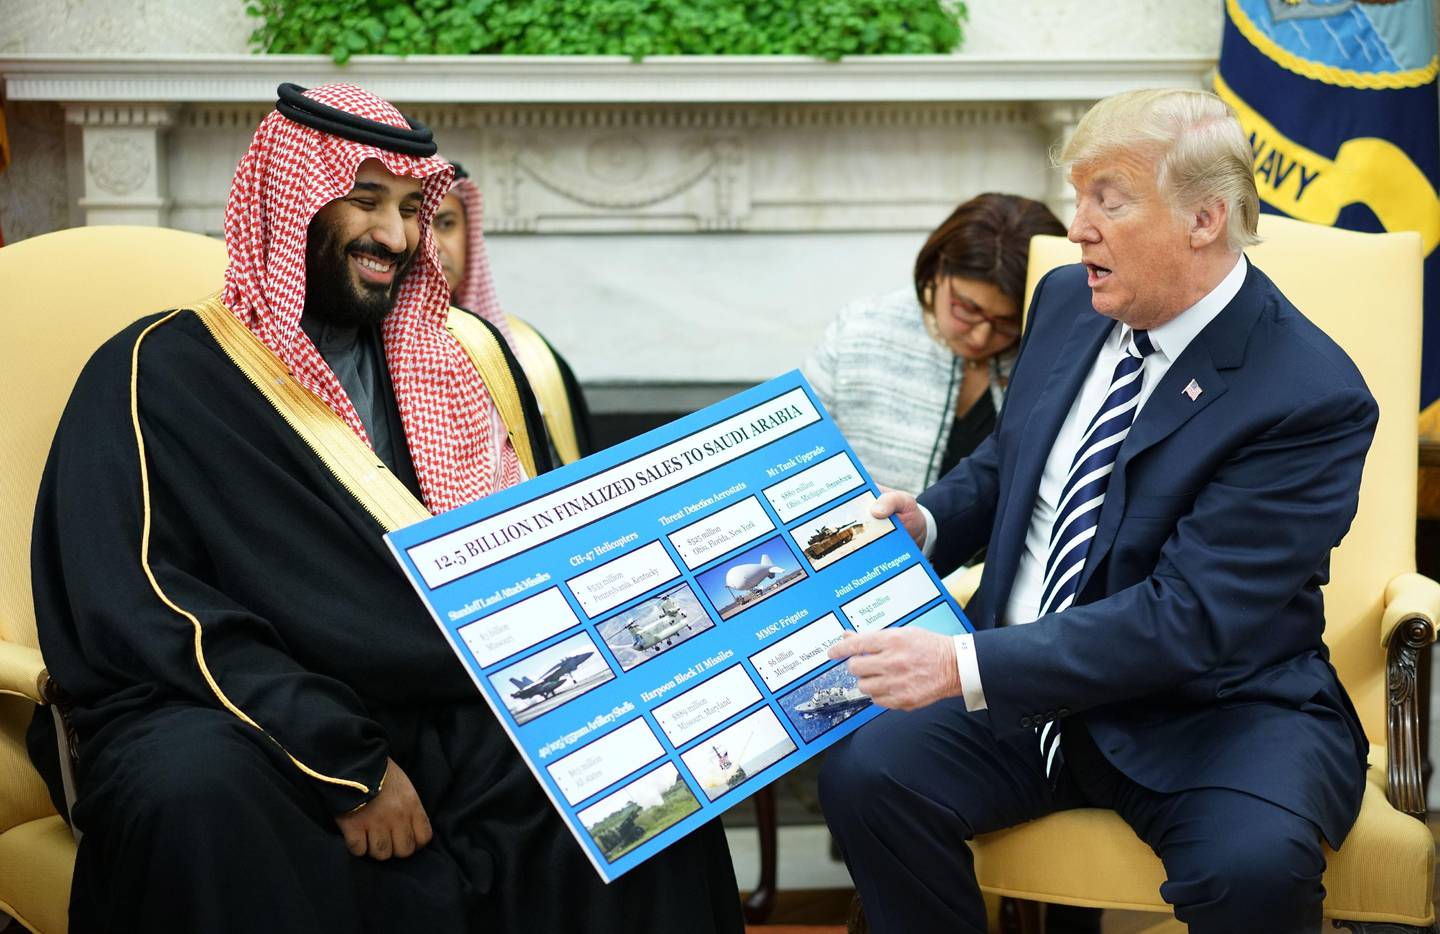 (FILES) In this file photo taken on March 20, 2018 US President Donald Trump (R) looks at a defence sales chart with Saudi Arabia's Crown Prince Mohammed bin Salman in the Oval Office of the White House in Washington, DC. - US President Donald Trump on July 24, 2019, vetoed three congressional resolutions barring weapons sales to US allies including Saudi Arabia and the United Arab Emirates. (Photo by MANDEL NGAN / AFP)